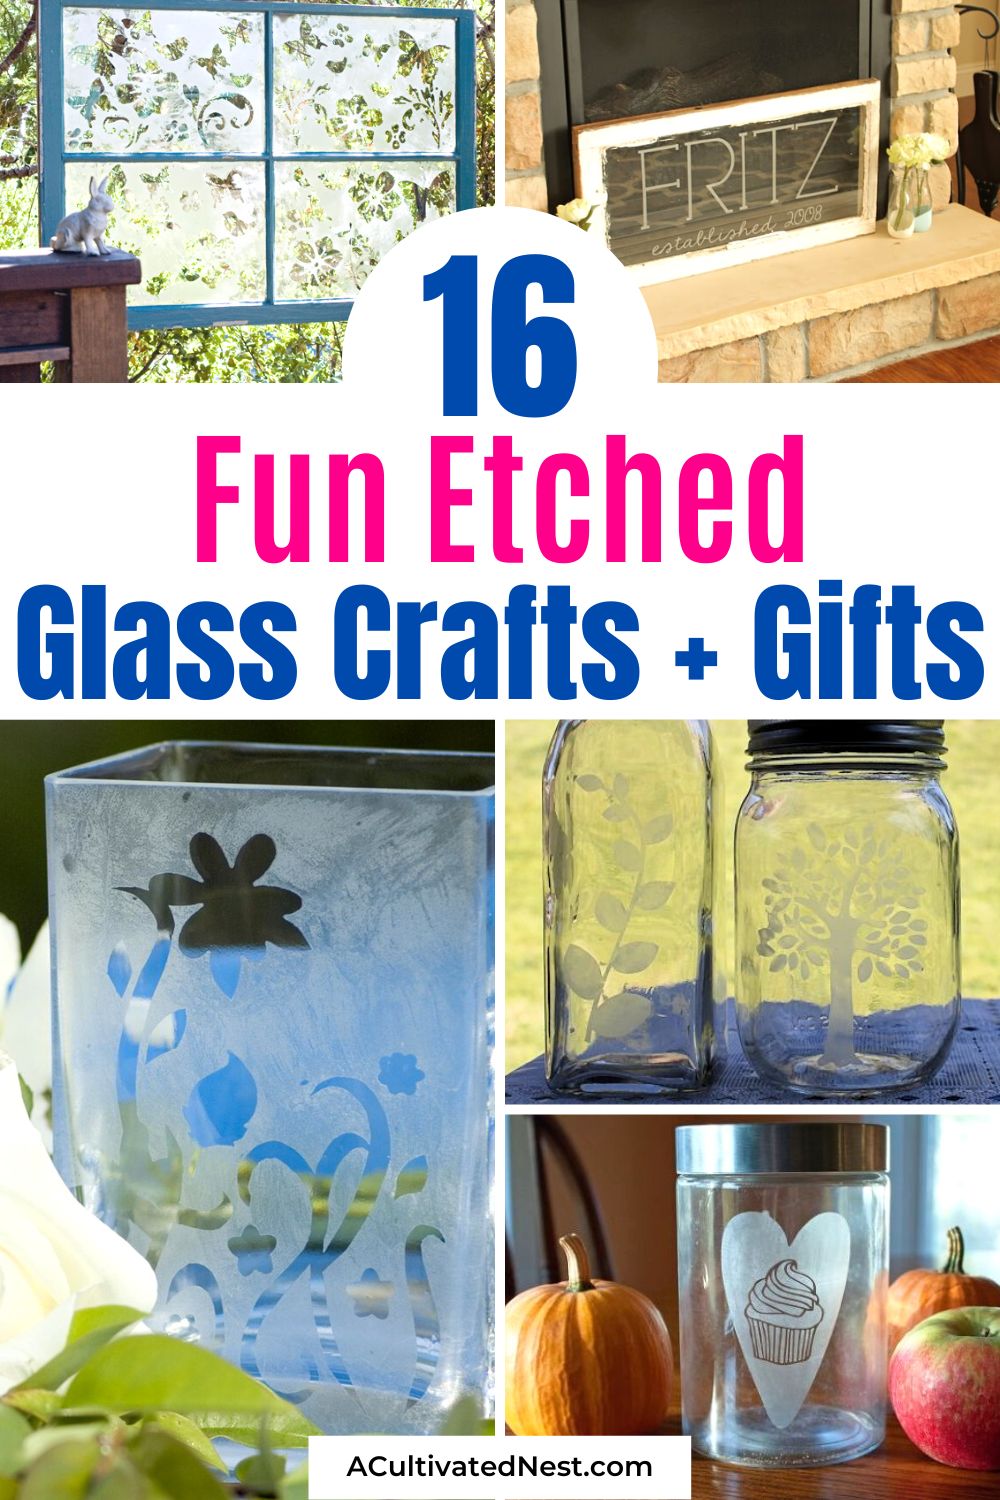 16 Fun Etched Glass Crafts- Elevate your glassware game with these captivating etched glass crafts. Whether you're looking to create custom gifts or enhance your own glass collection, this post has got you covered! | how to etch glass, #DIY #crafting #homemadeGifts #diyProjects #ACultivatedNest